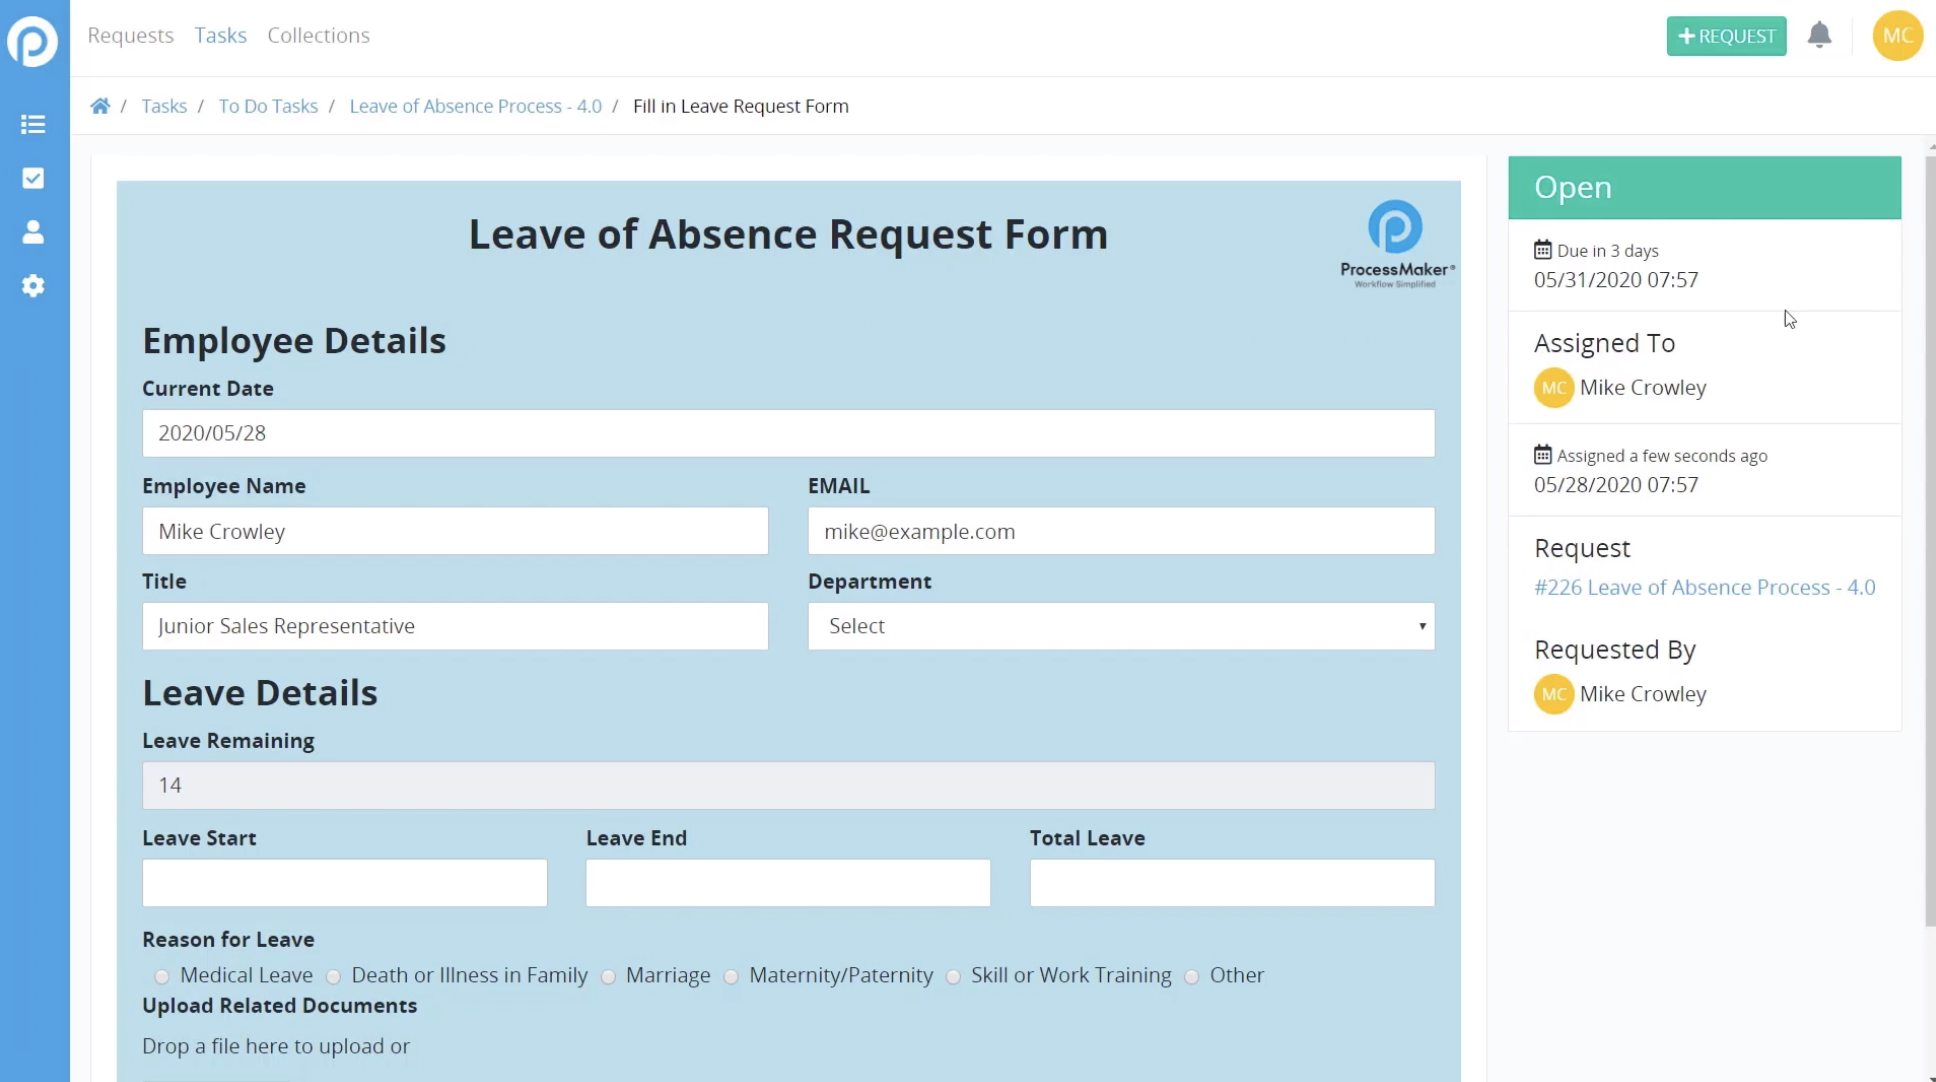 Running a Leave of Absence Request